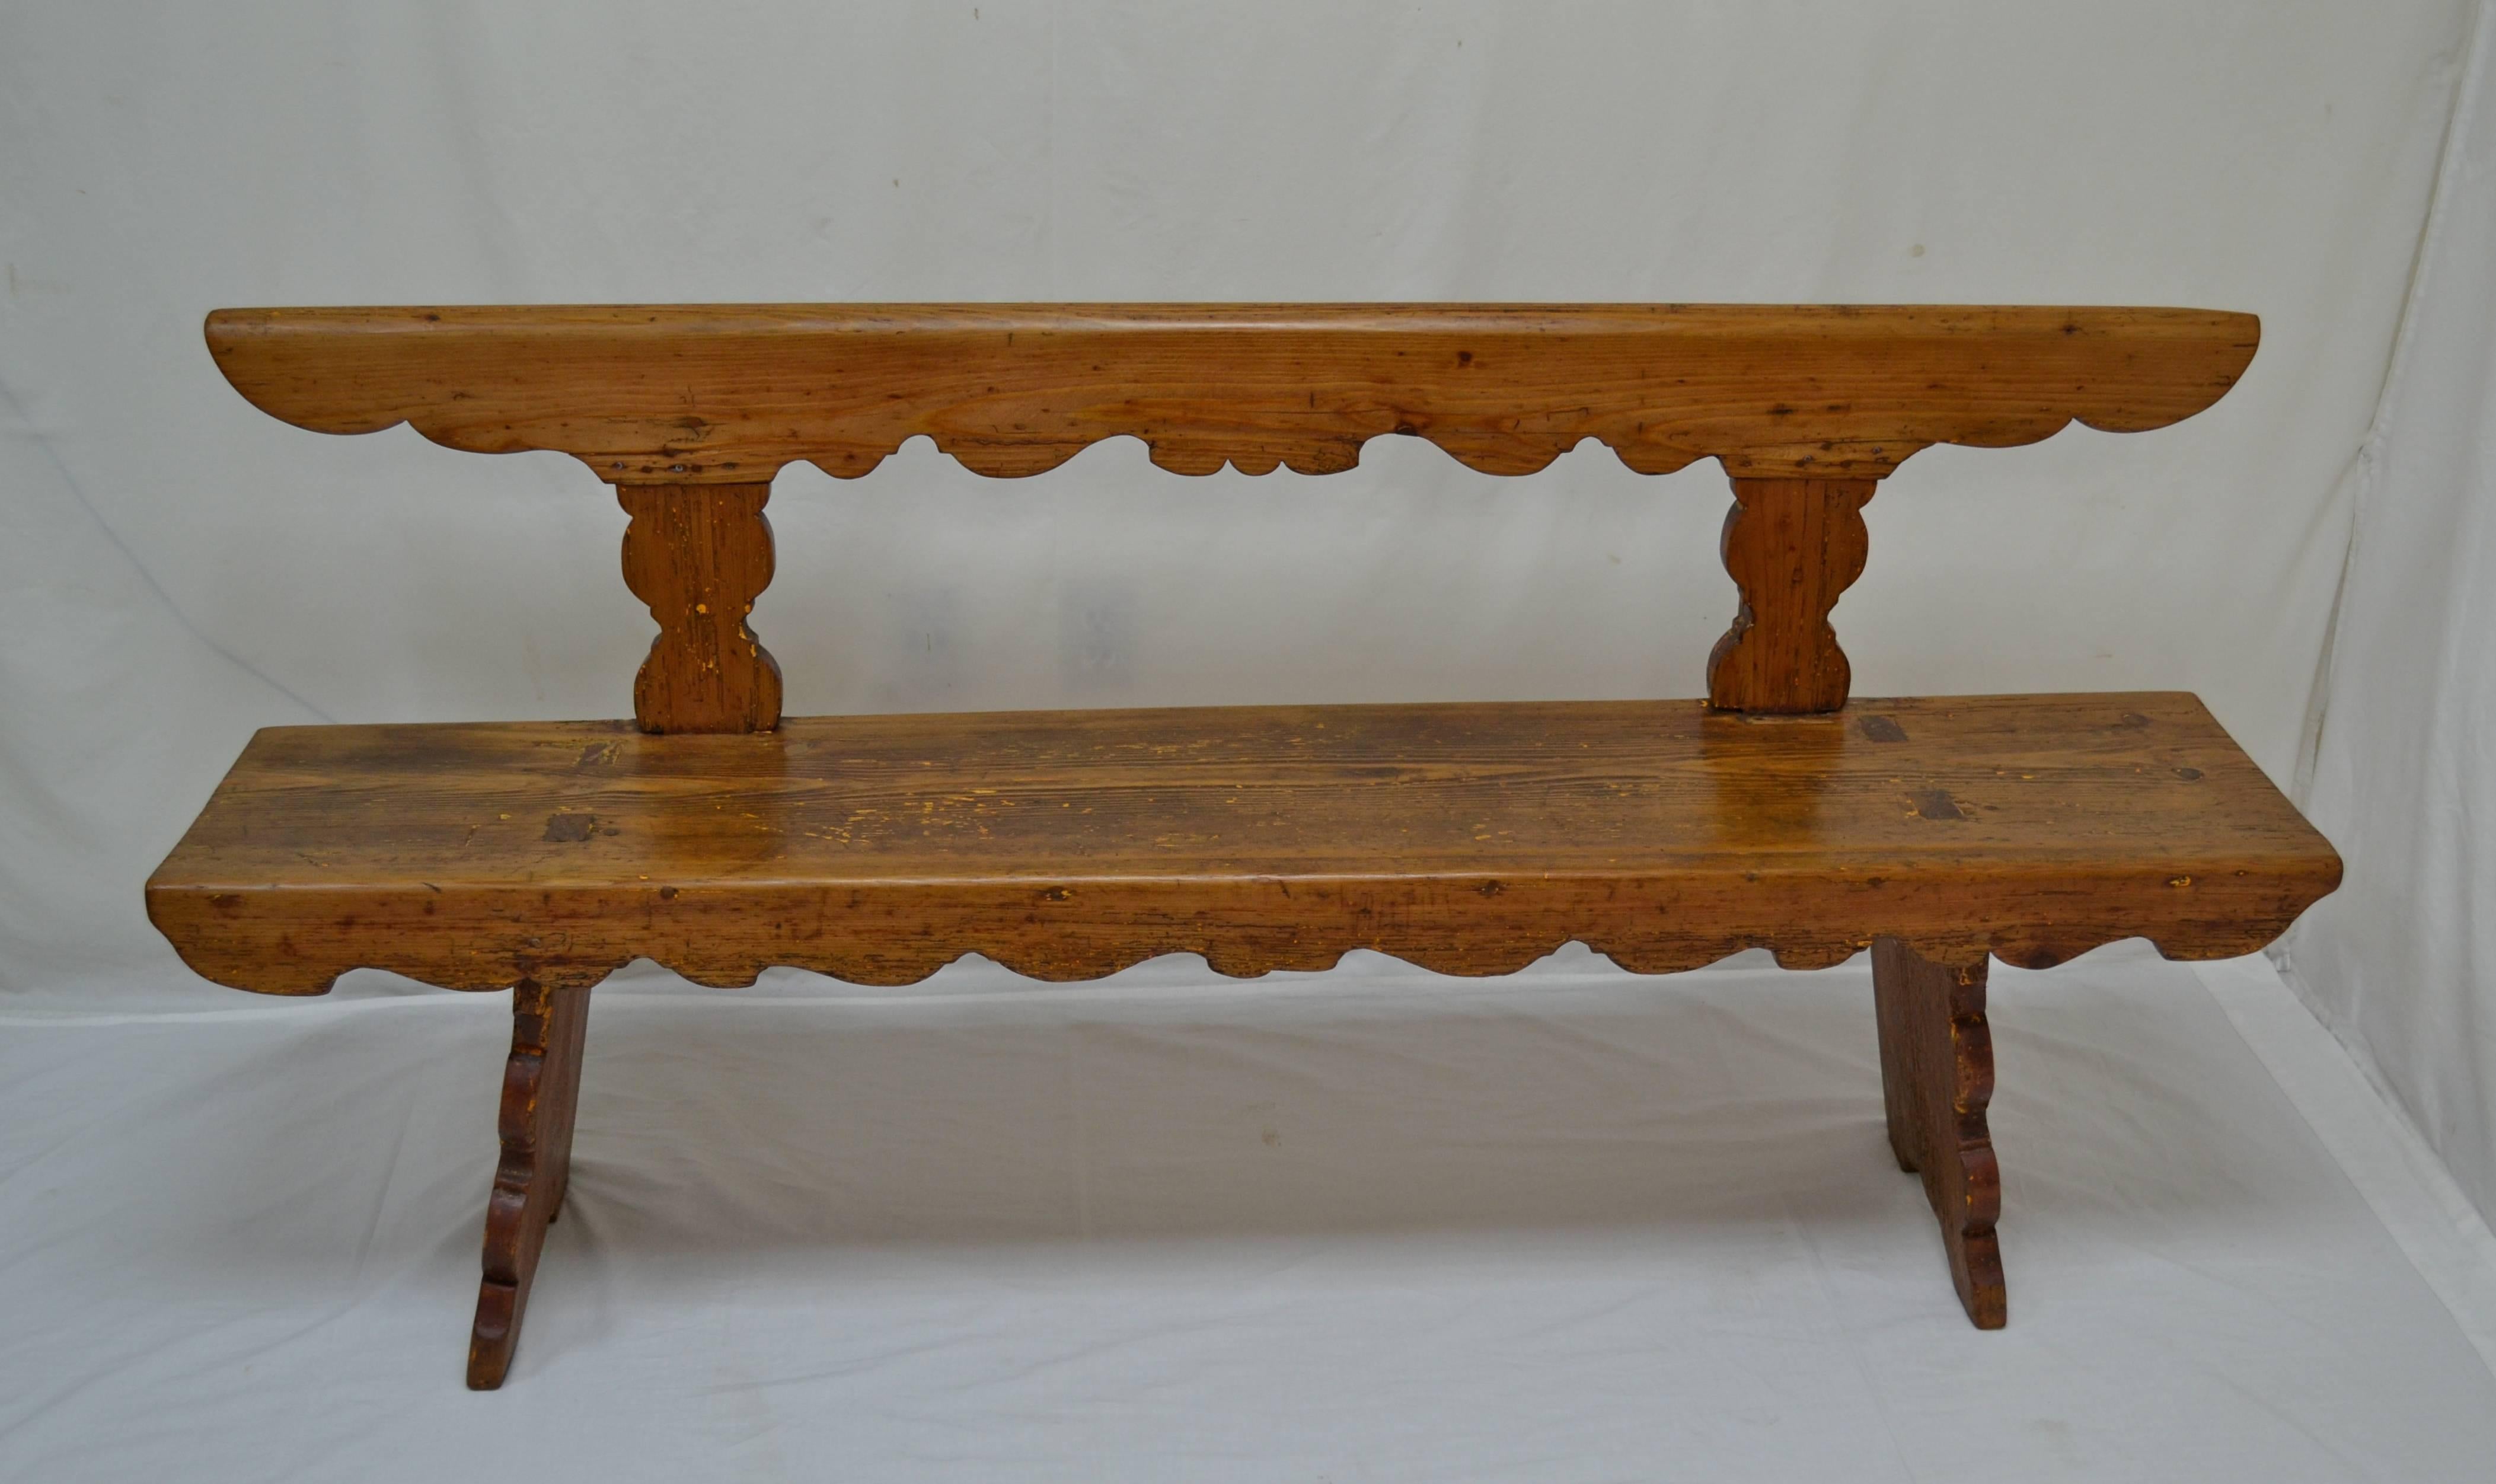 This is a beautiful rustic pine bench or settle in traditional Hungarian style. The sturdy back rail is straight on the top, rounded and worn smooth, and scalloped on the underside, a theme repeated on the front rail. Two shapely splats attach the